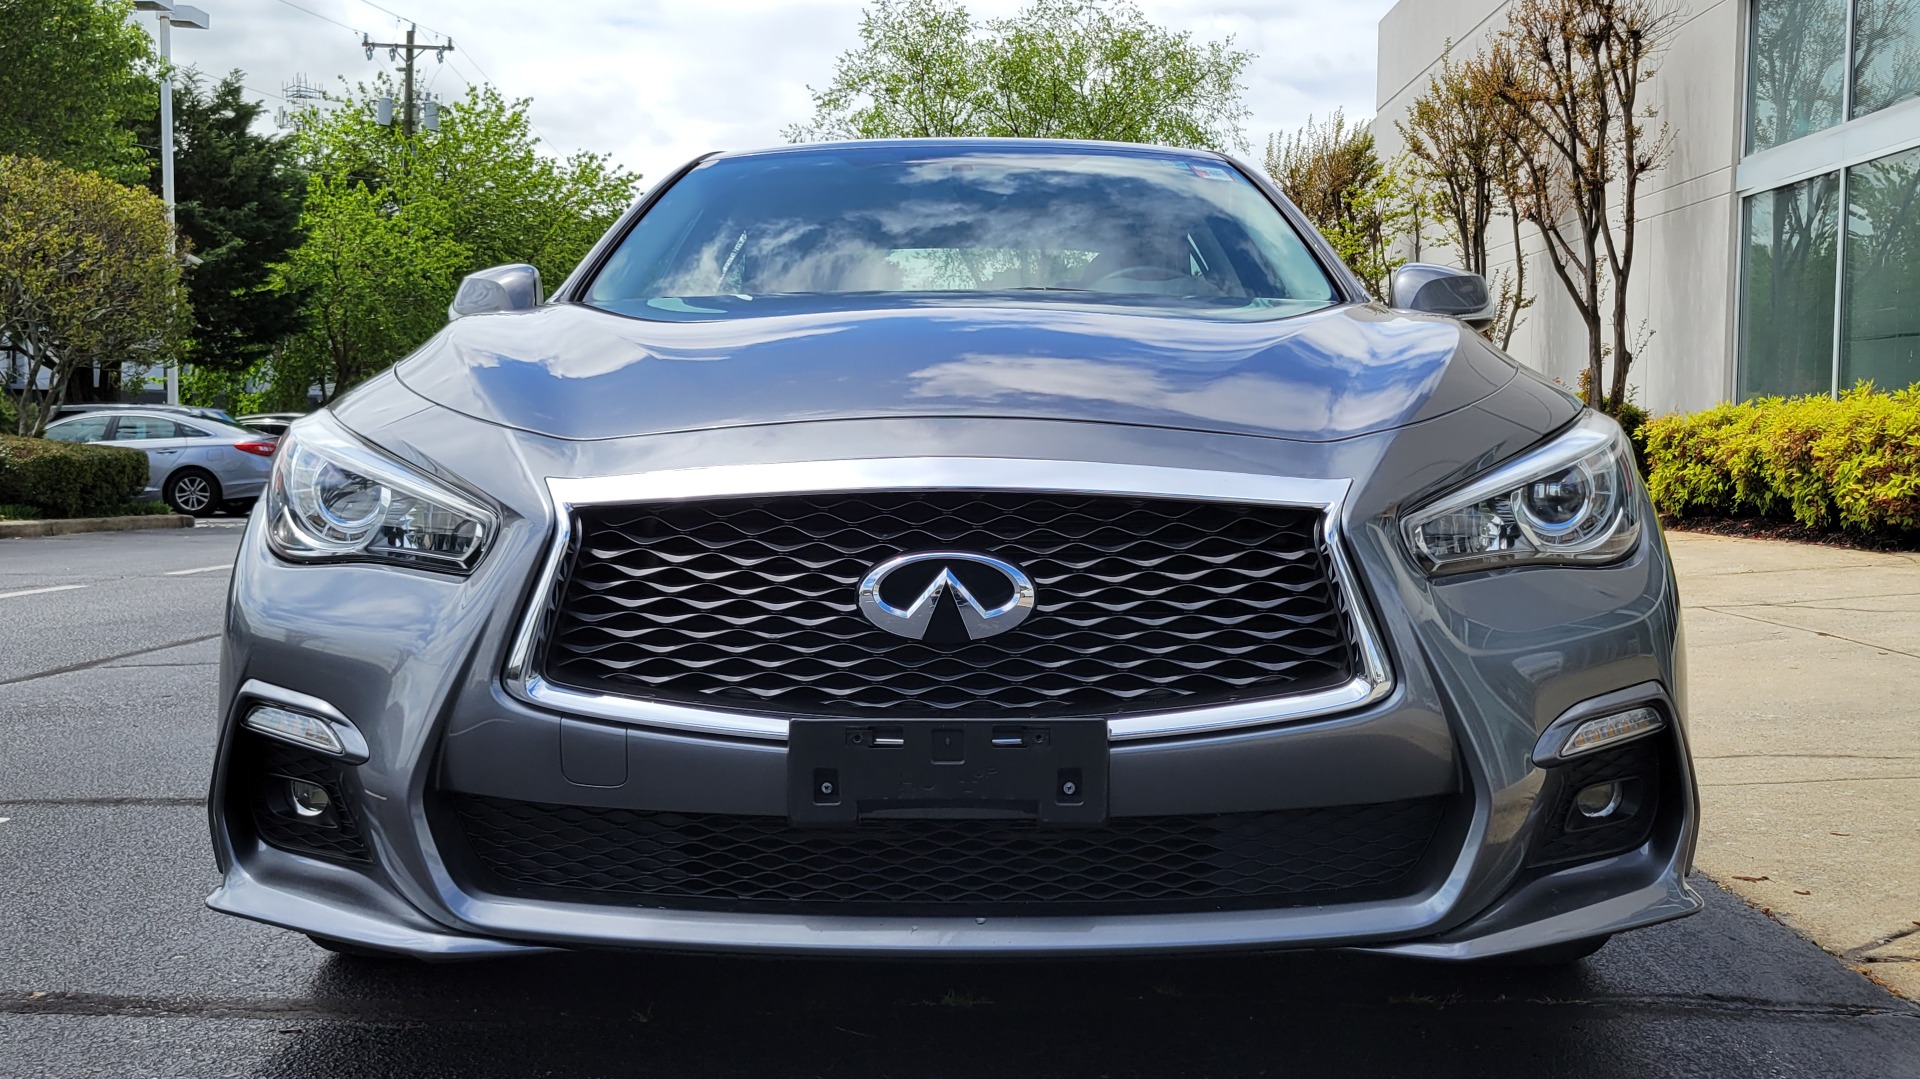 Used 2018 INFINITI Q50 3.0T SPORT AWD / ESSENTIALS / NAV / SUNROOF / HTD STS / REARVIEW for sale Sold at Formula Imports in Charlotte NC 28227 77